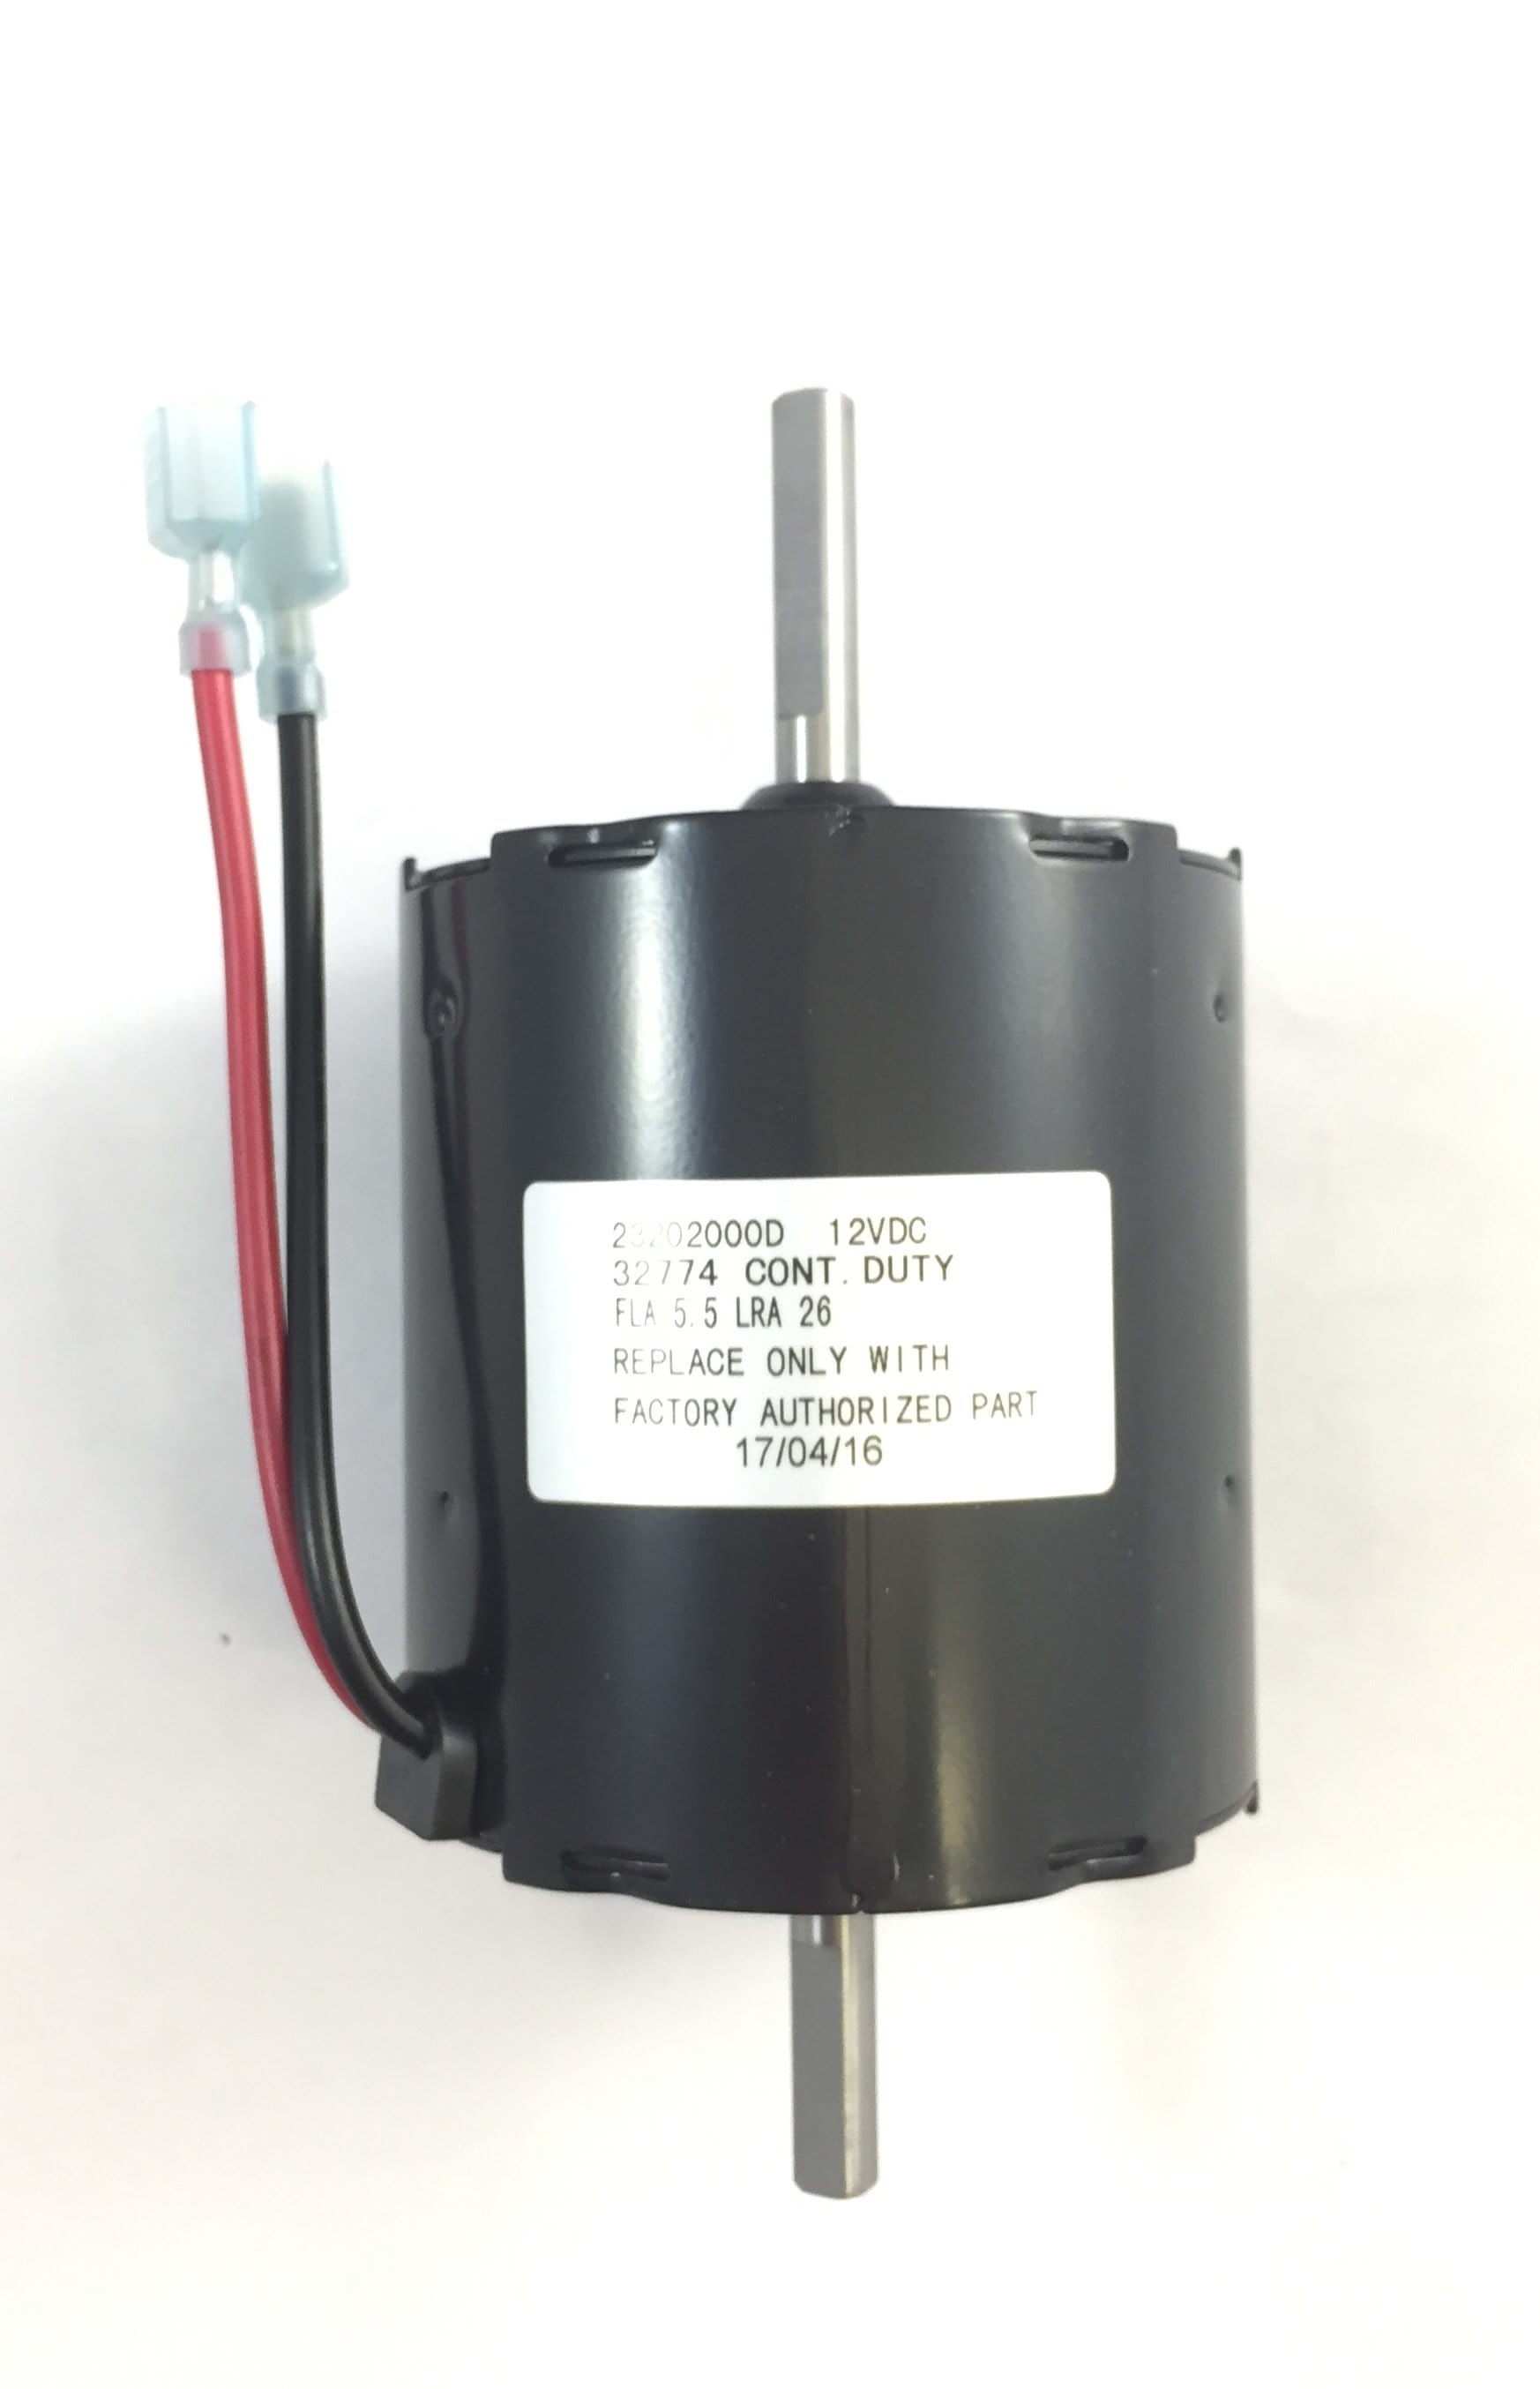 Atwood 30130 Hydro Flame Furnace Motor Replacement